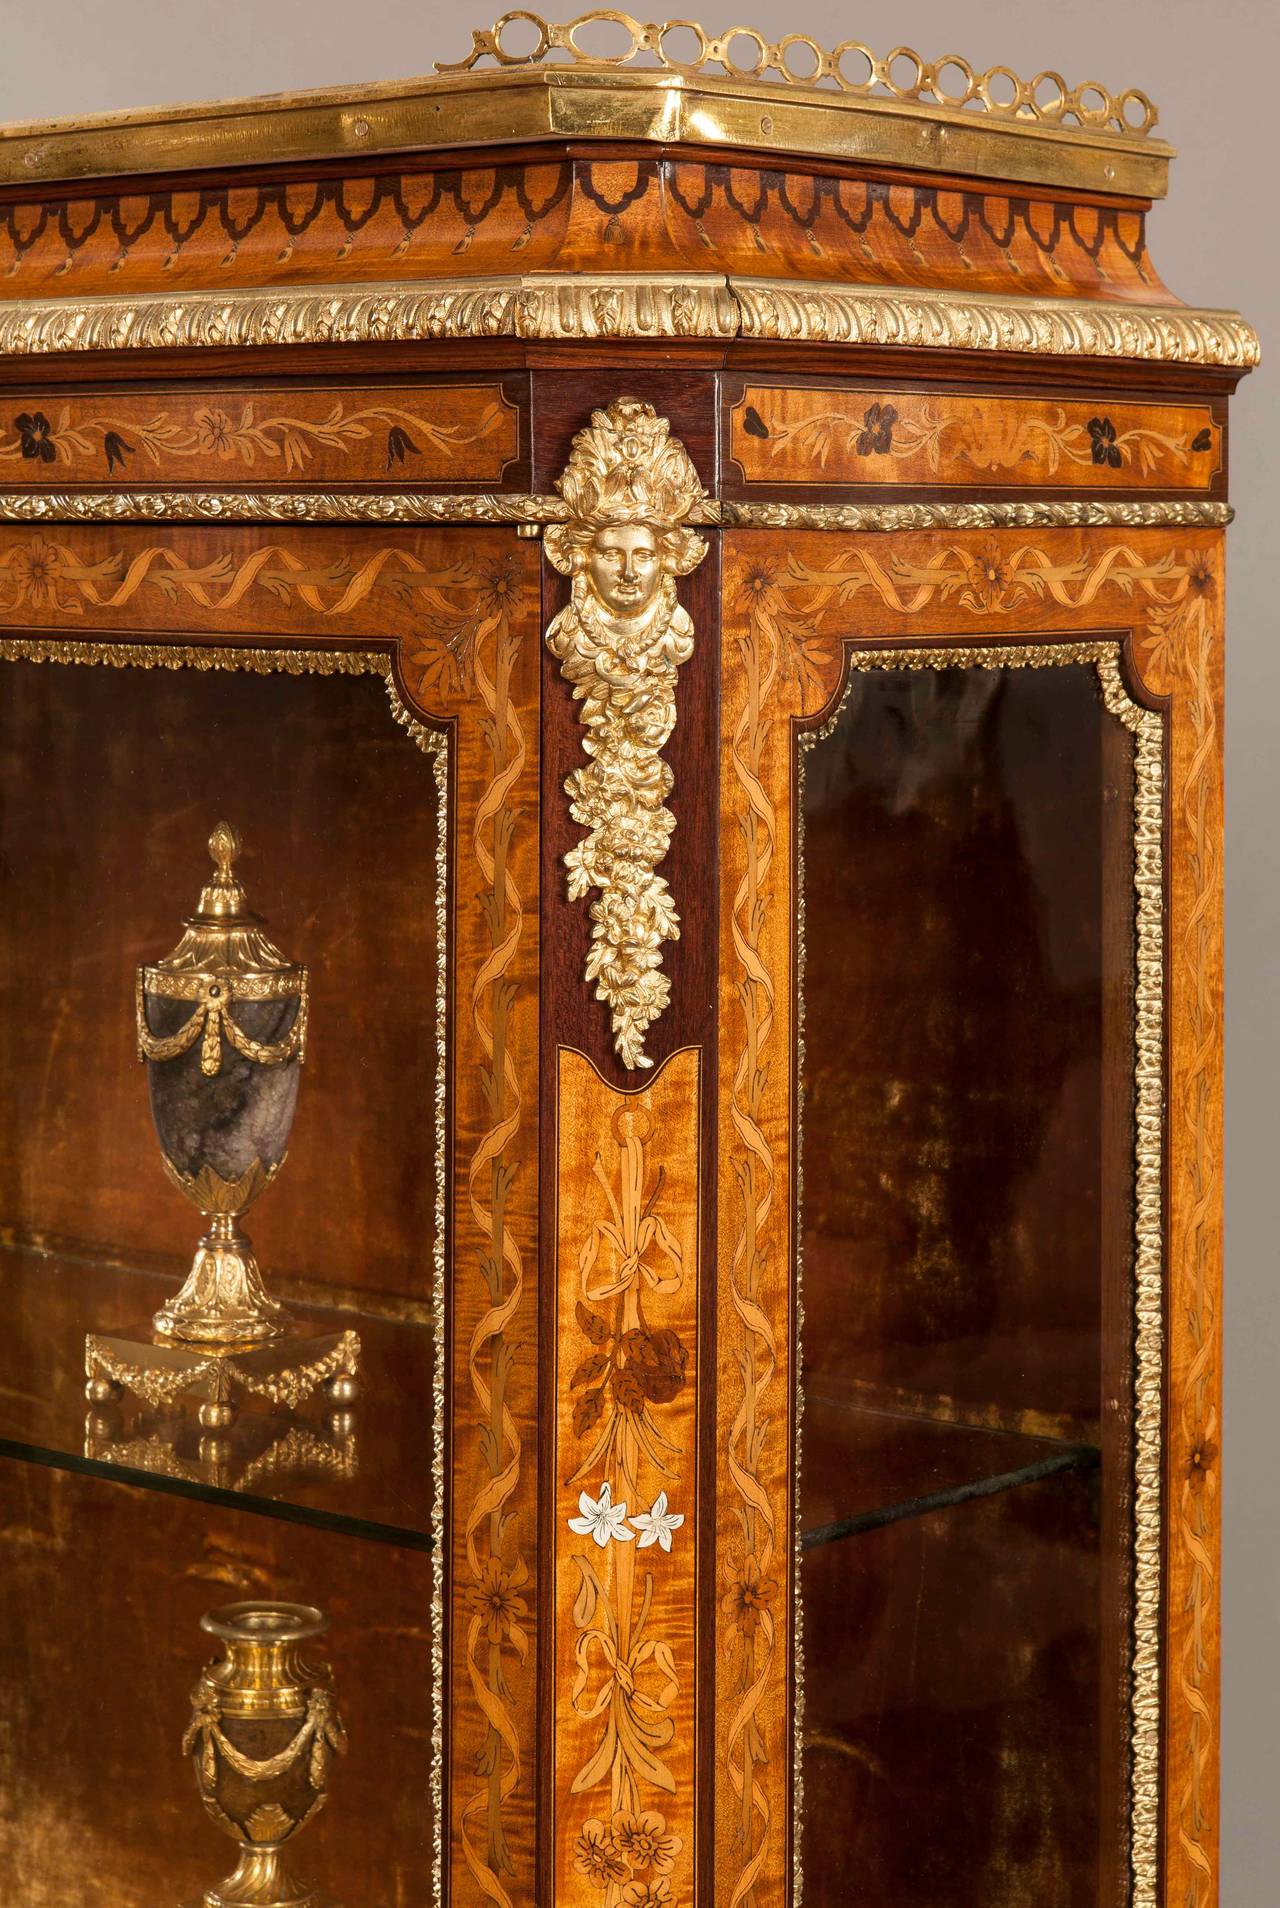 A Mid-Nineteenth Century Vitrine Cabinet 
Attributed to Holland & Sons

Constructed in satinwood, with kingwood cross banding, marquetry inlay in specimen woods, and dressed with ormolu mounts; rising from swept cabriole legs, having foliate sabots